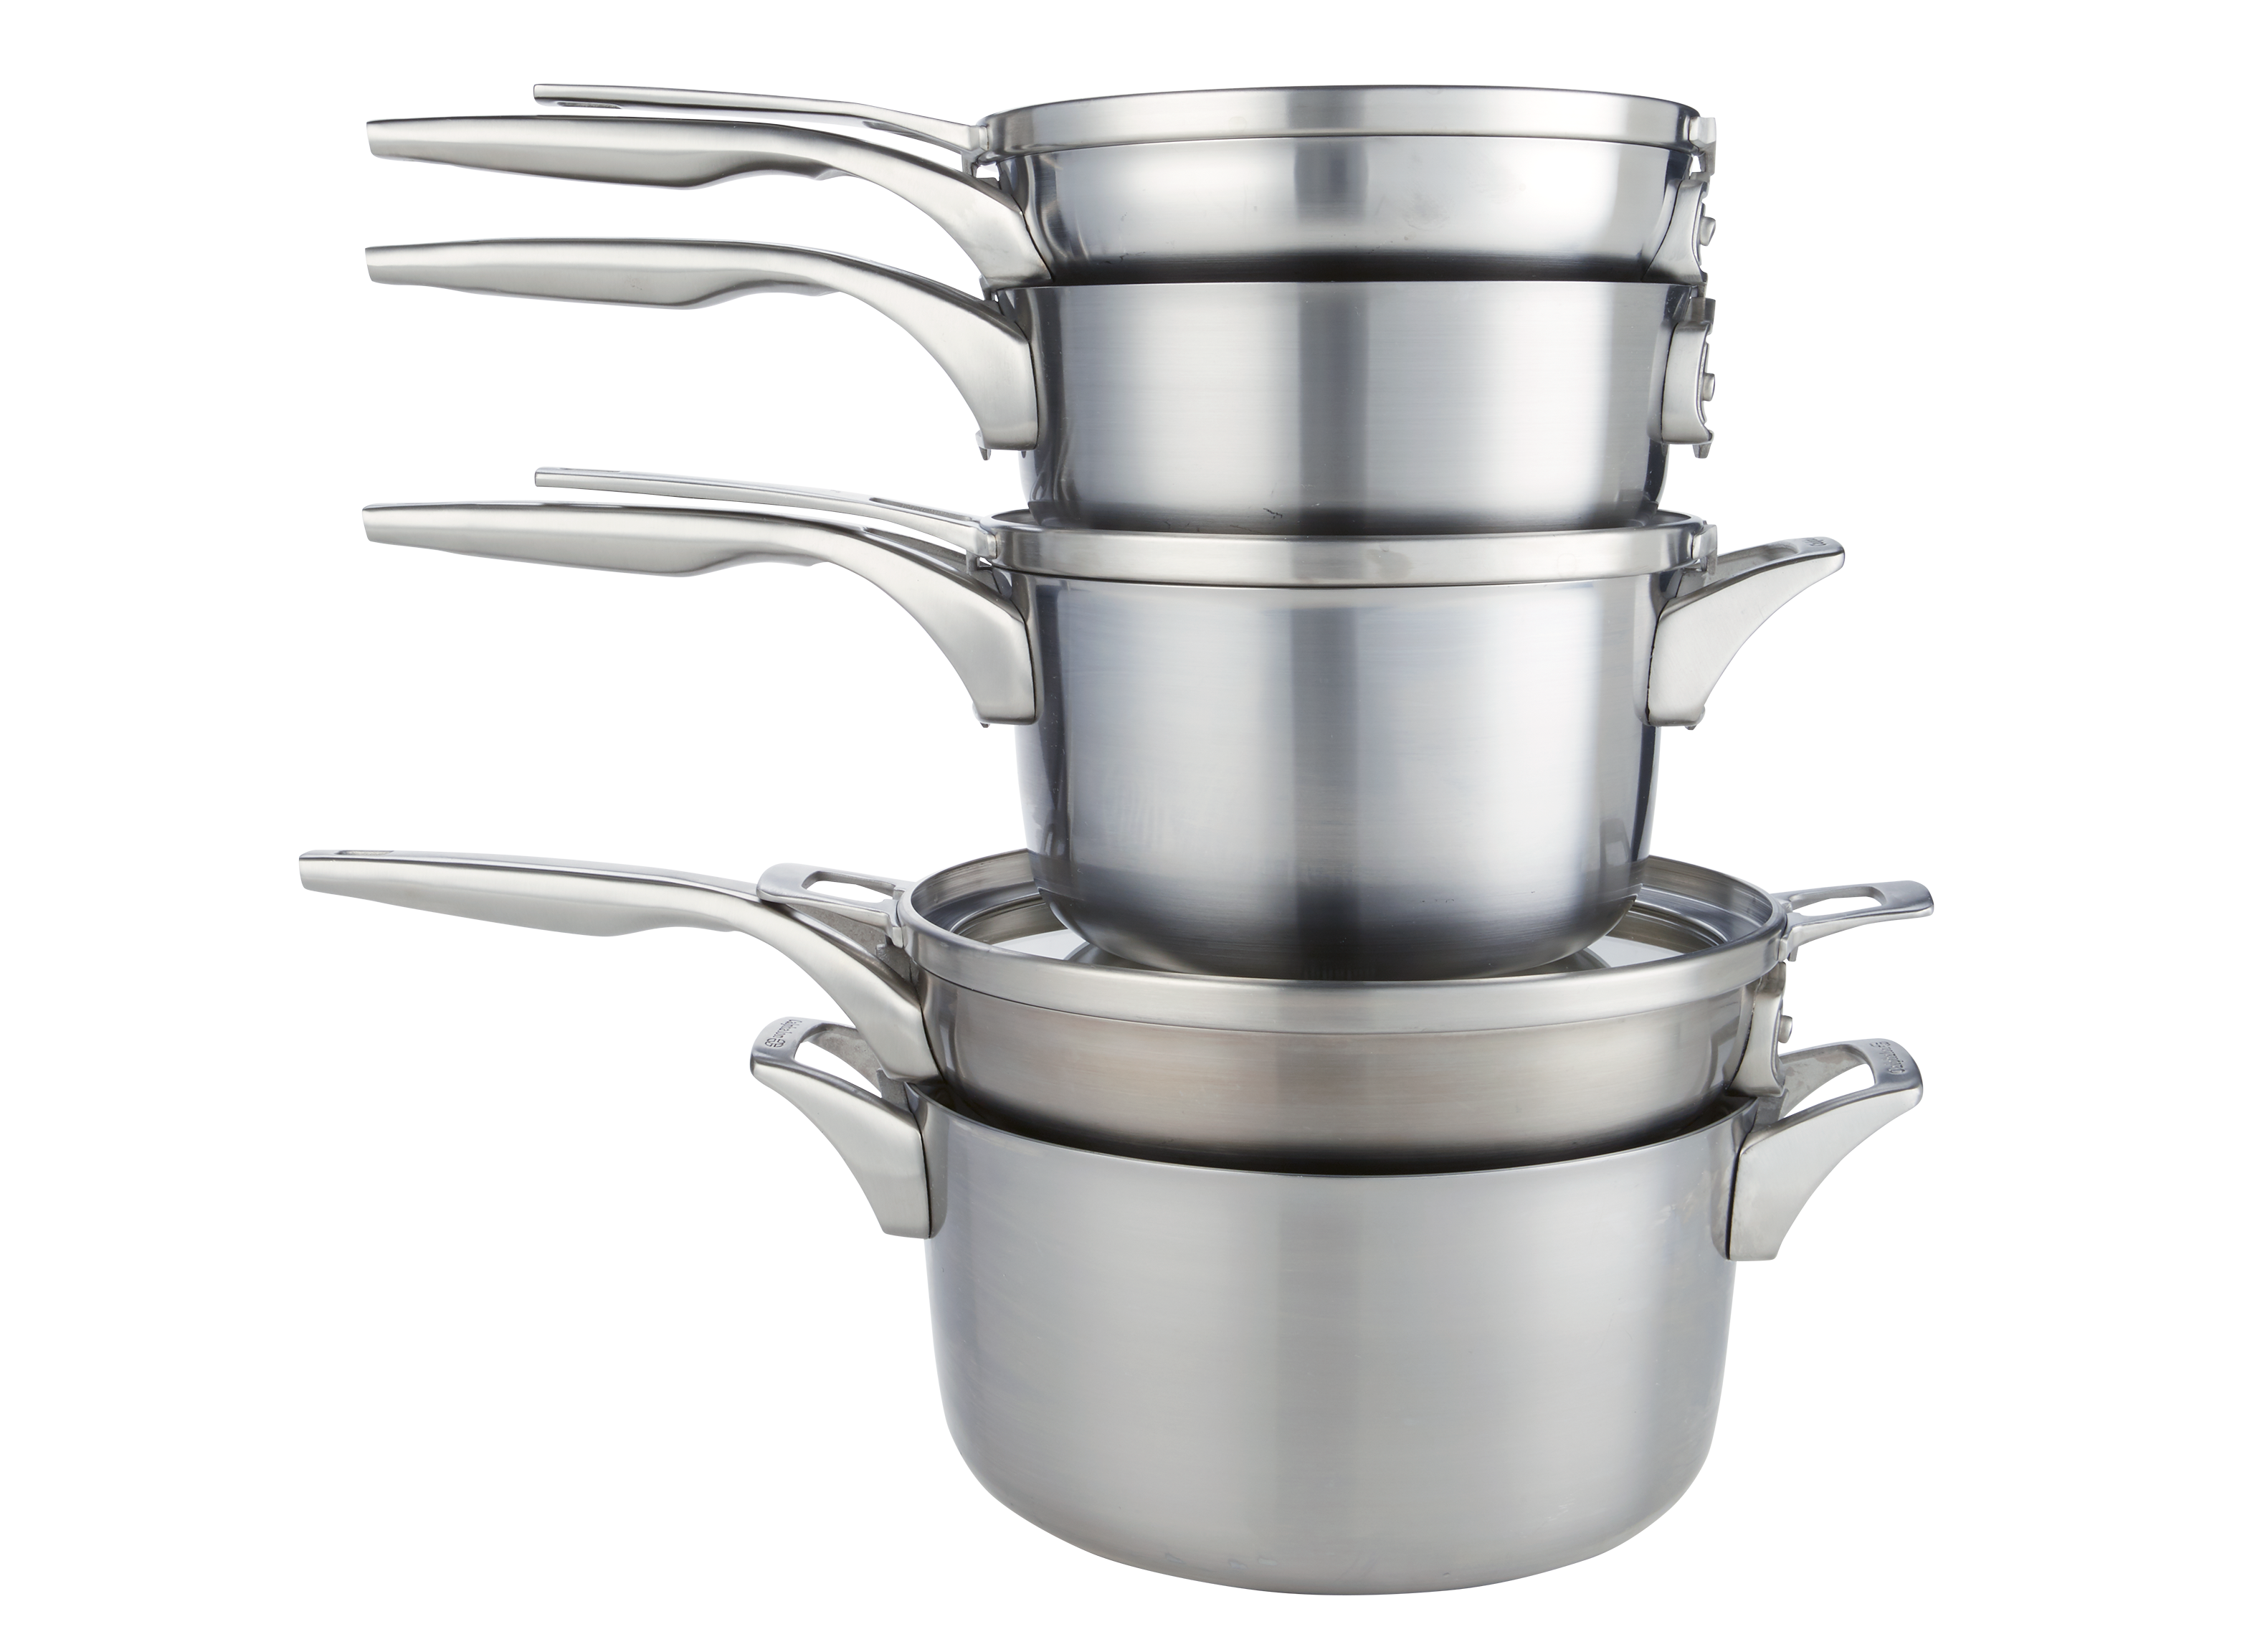 Calphalon Premier Stainless Steel Cookware Review - Consumer Reports